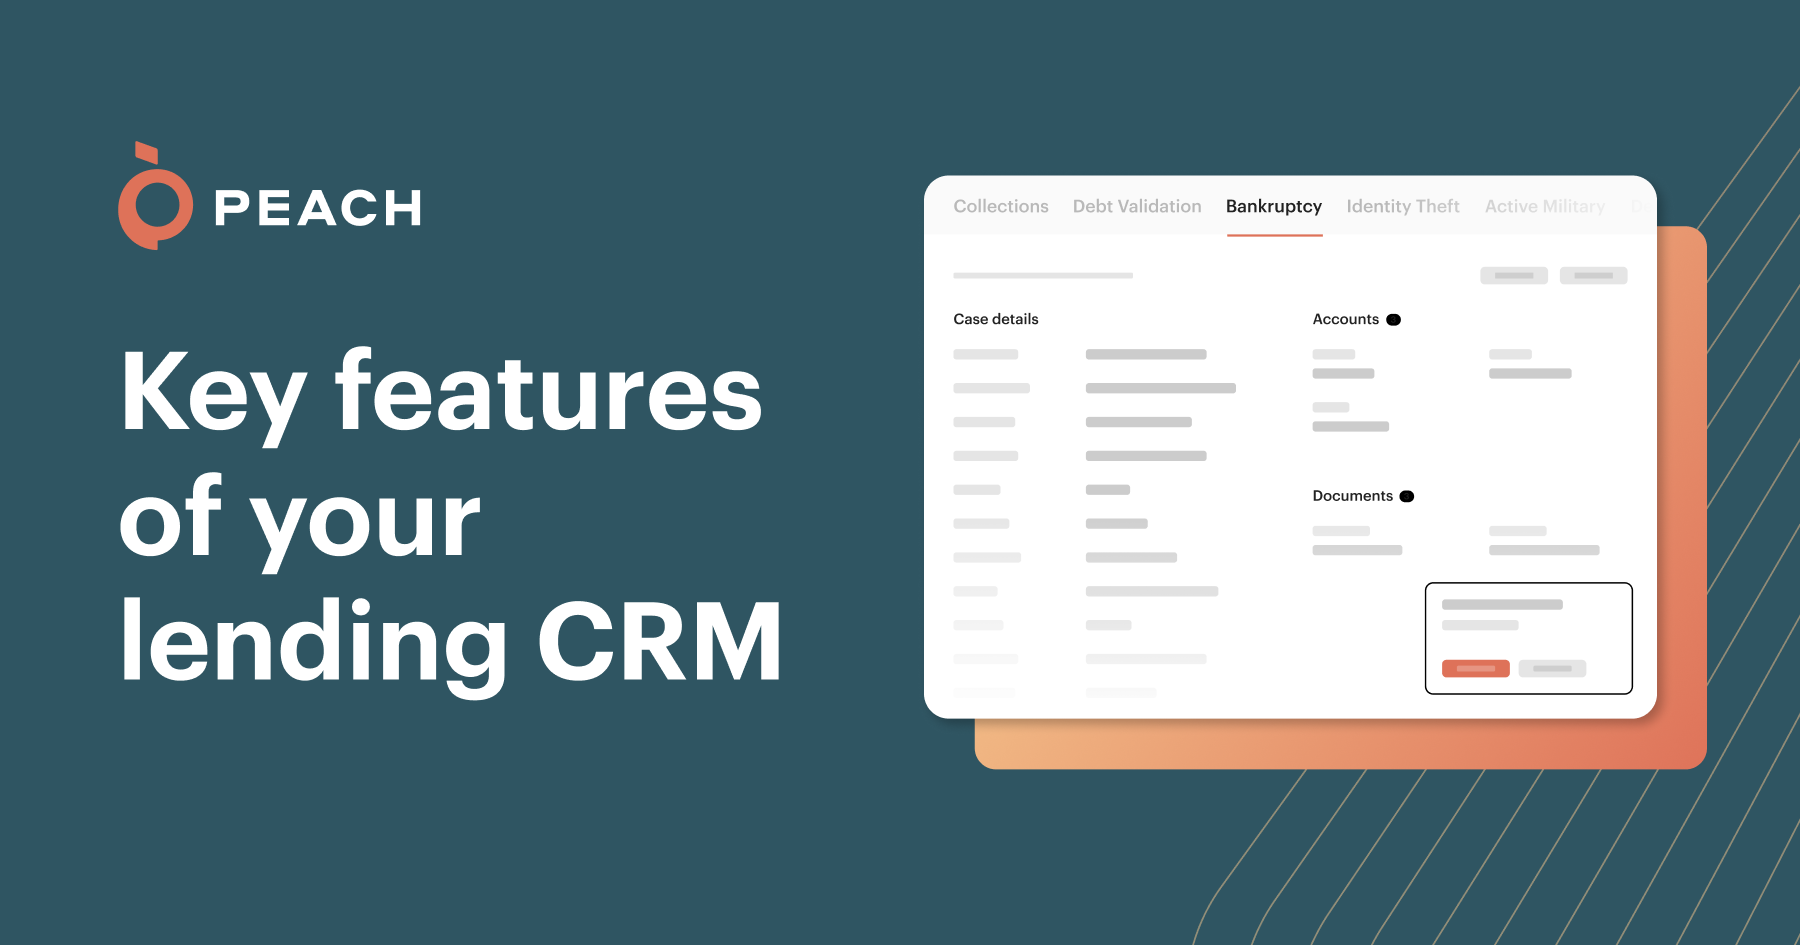 Key features of your lending CRM